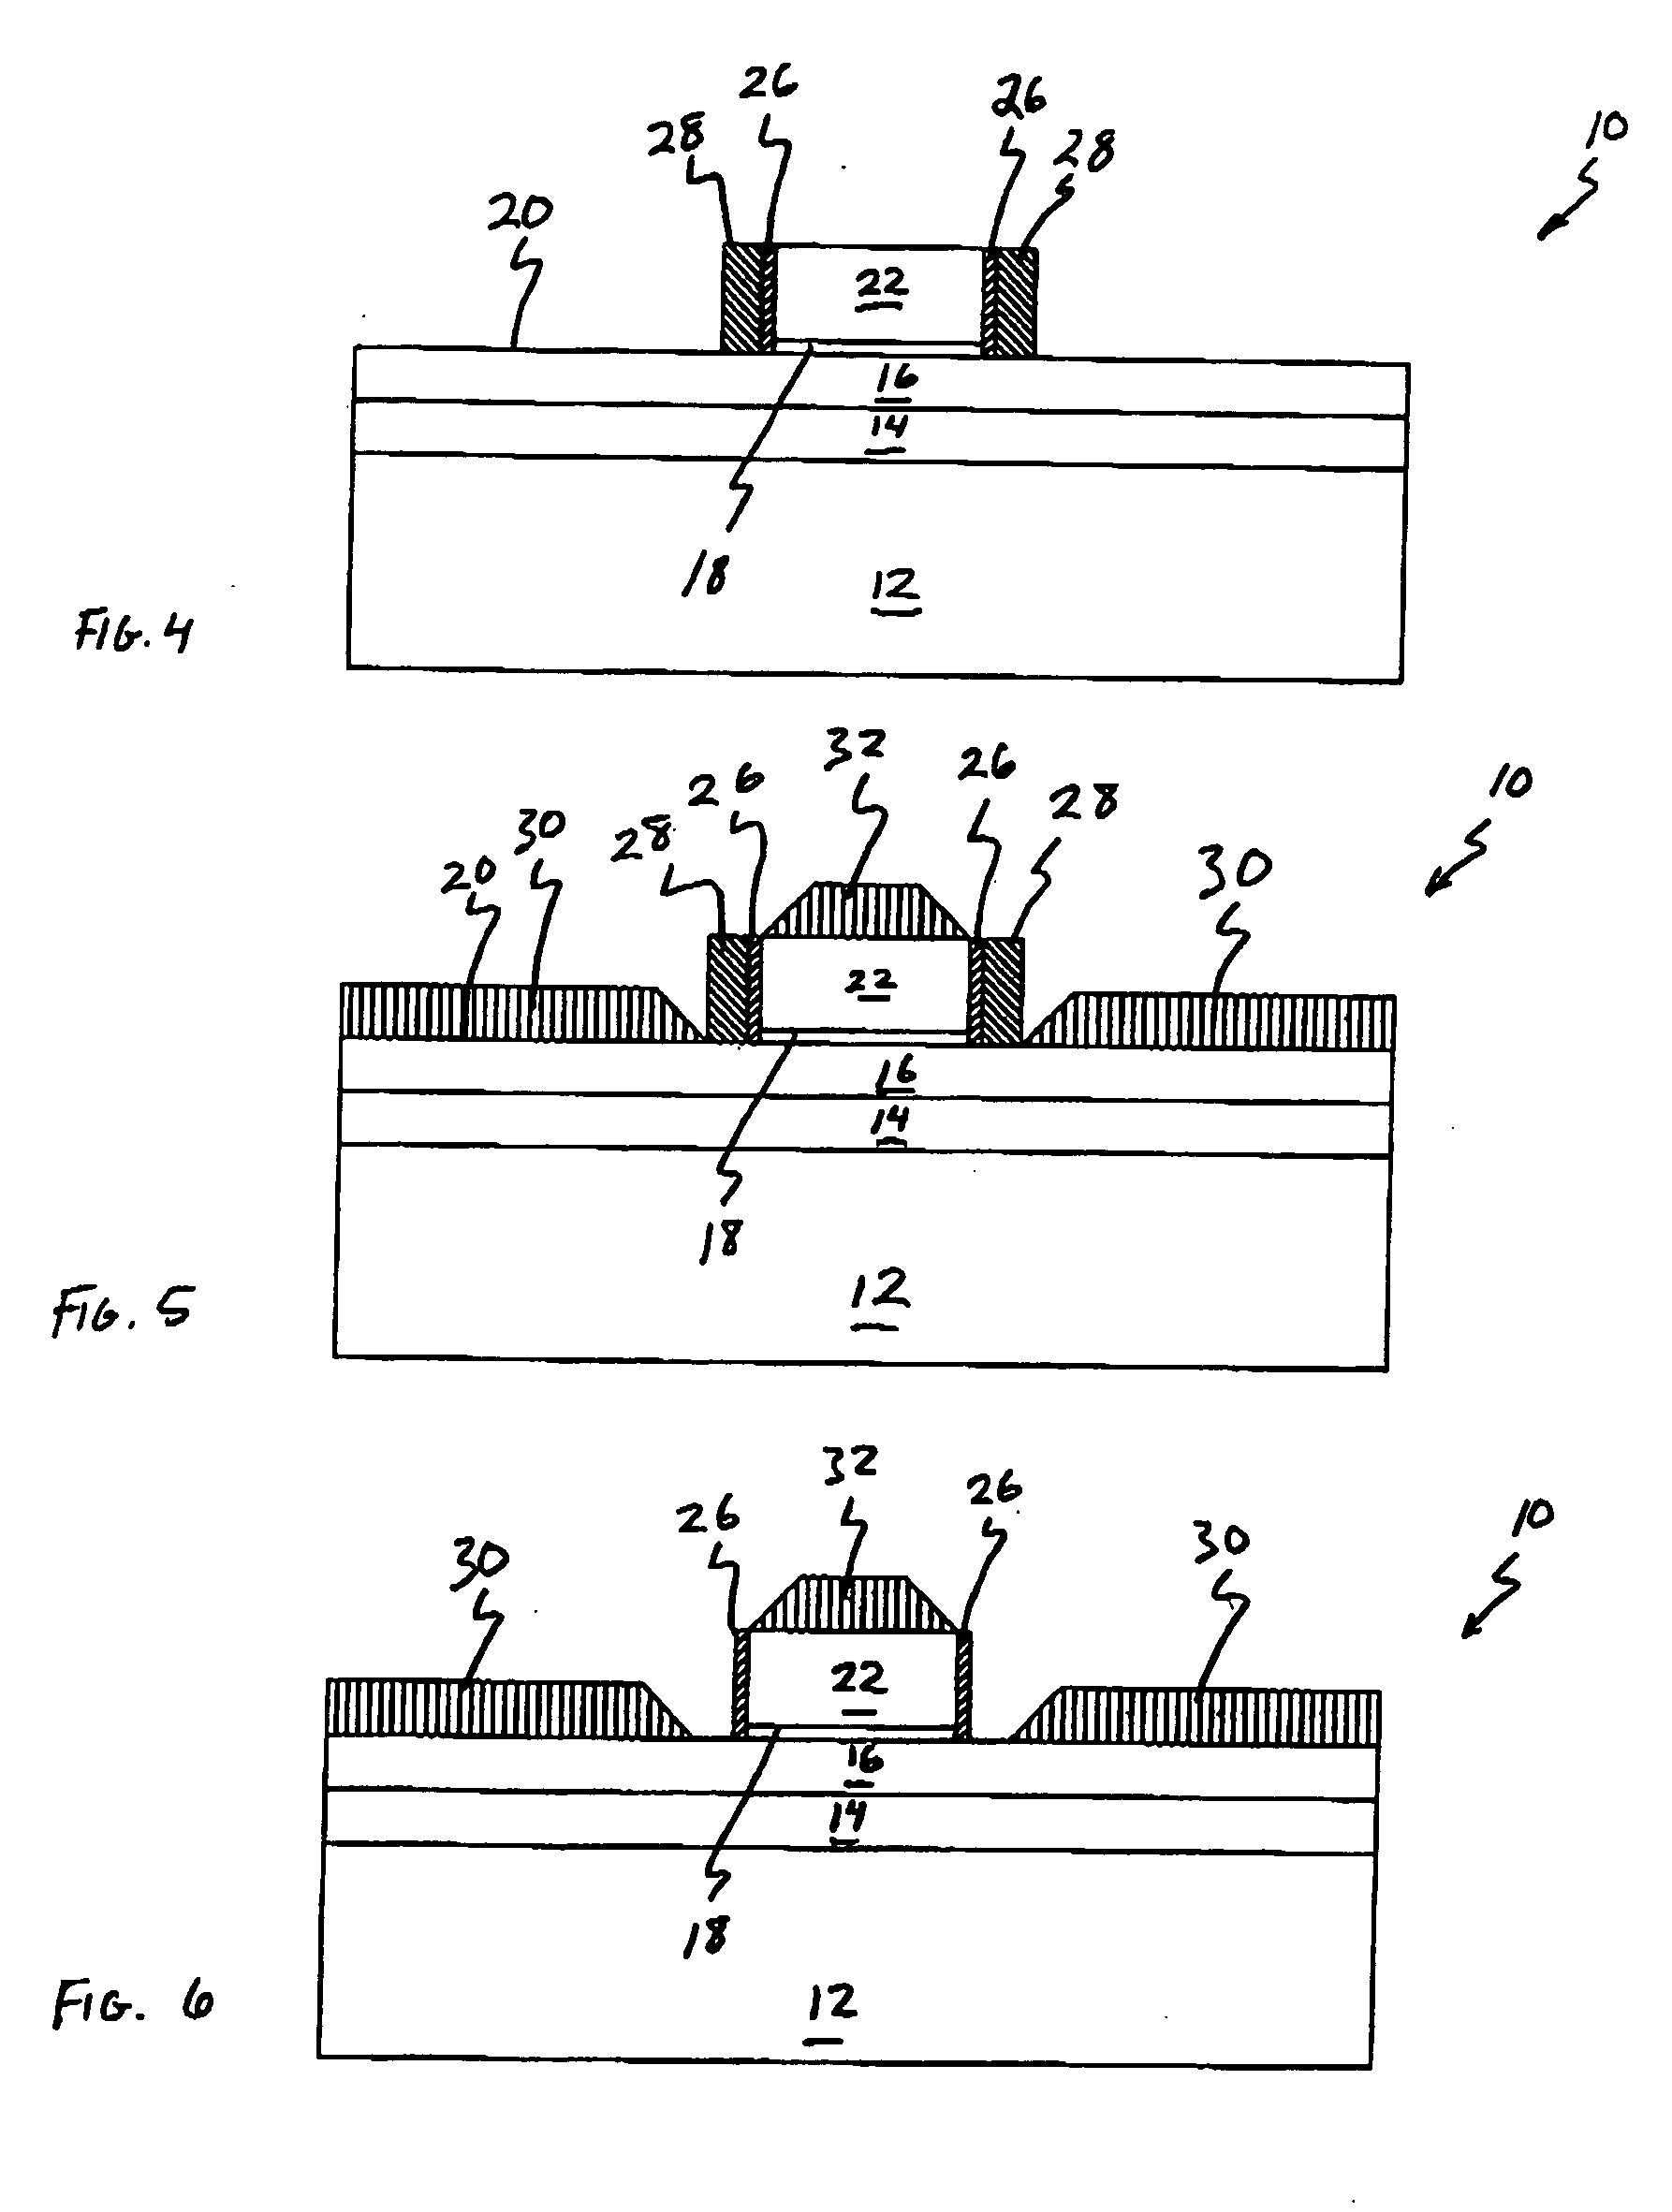 Process for ultra-thin body SOI devices that incorporate EPI silicon tips and article made thereby